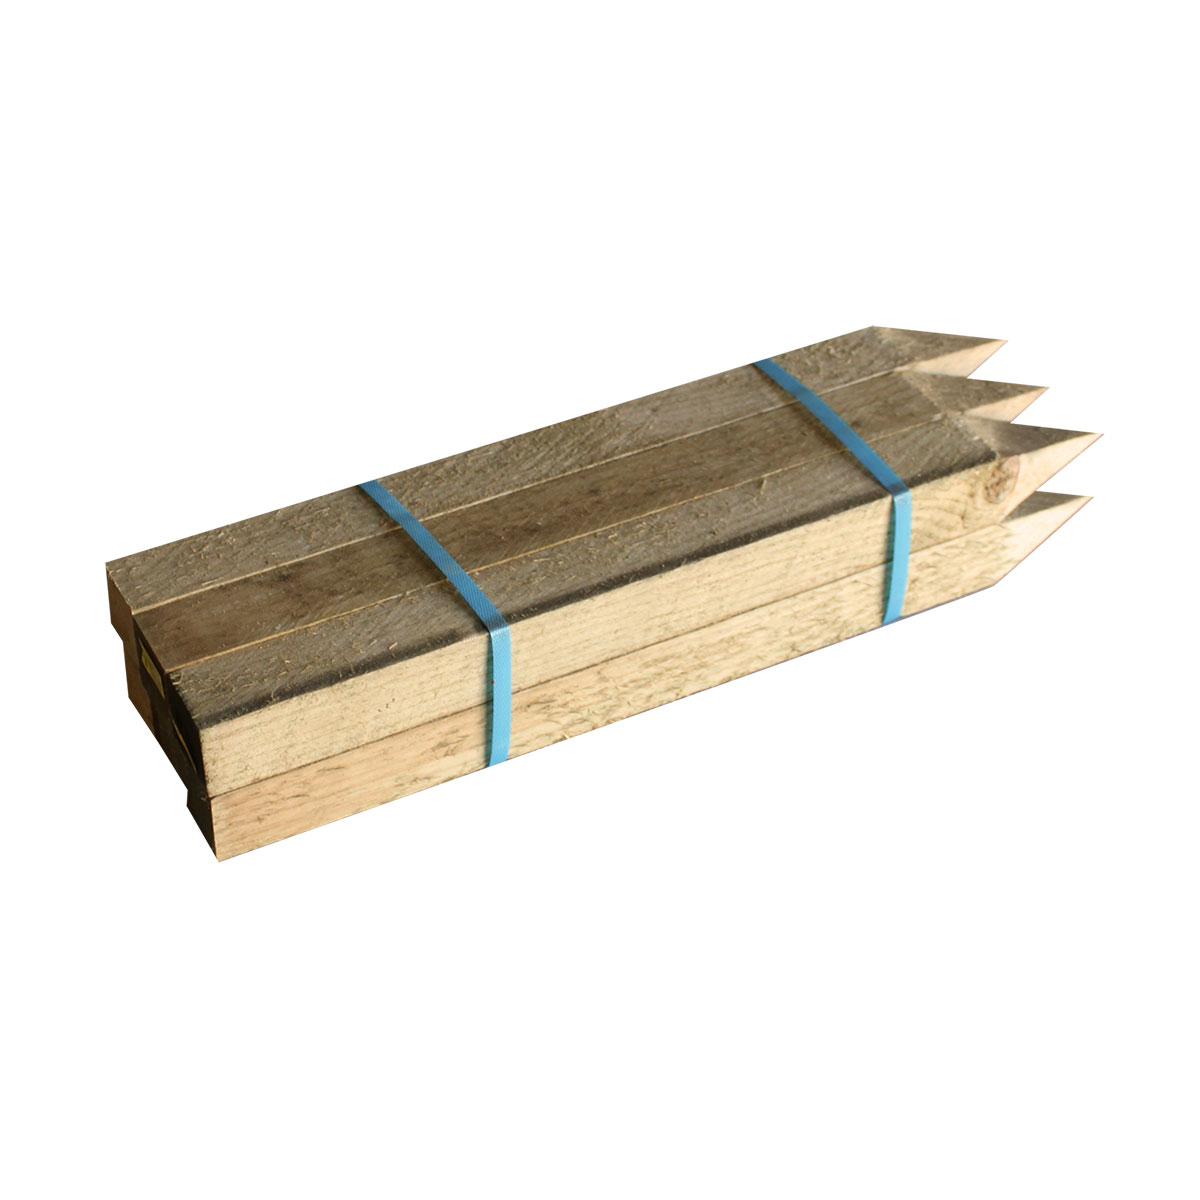 Treated Pine Pegs 50 x 50 x 600mm - 6 Pack